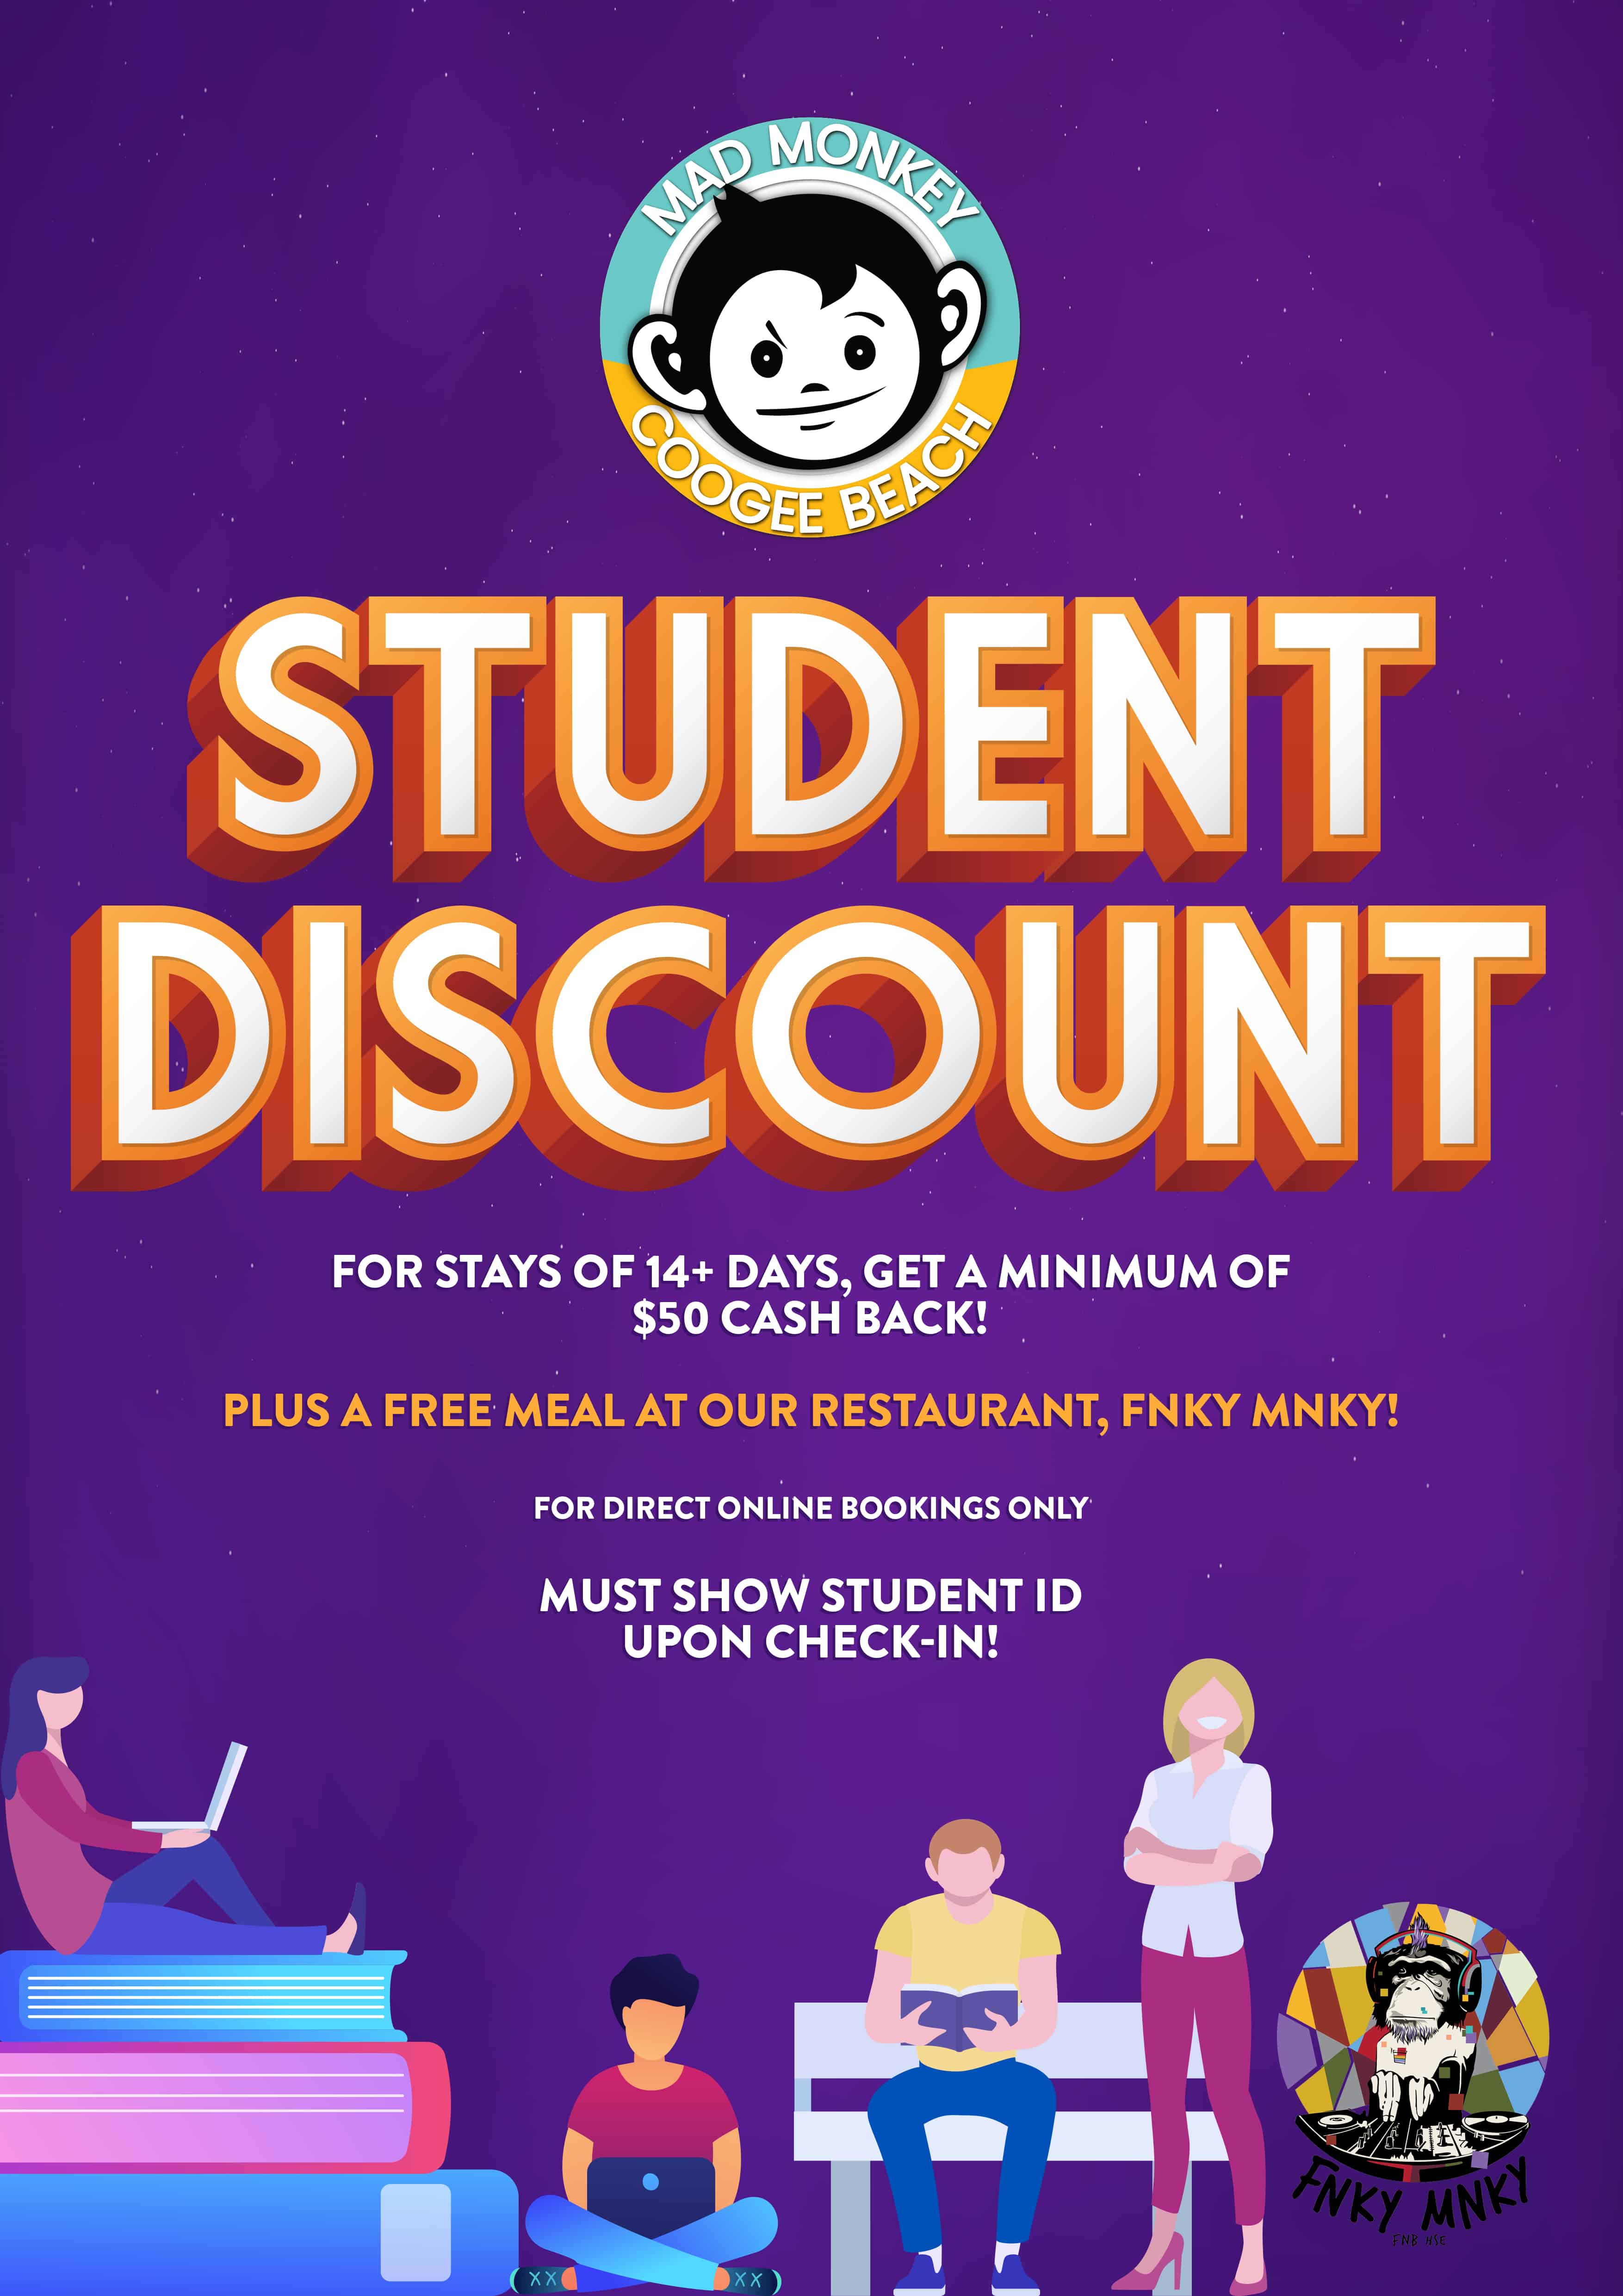 Mad Monkey Coogee Beach Student Discount